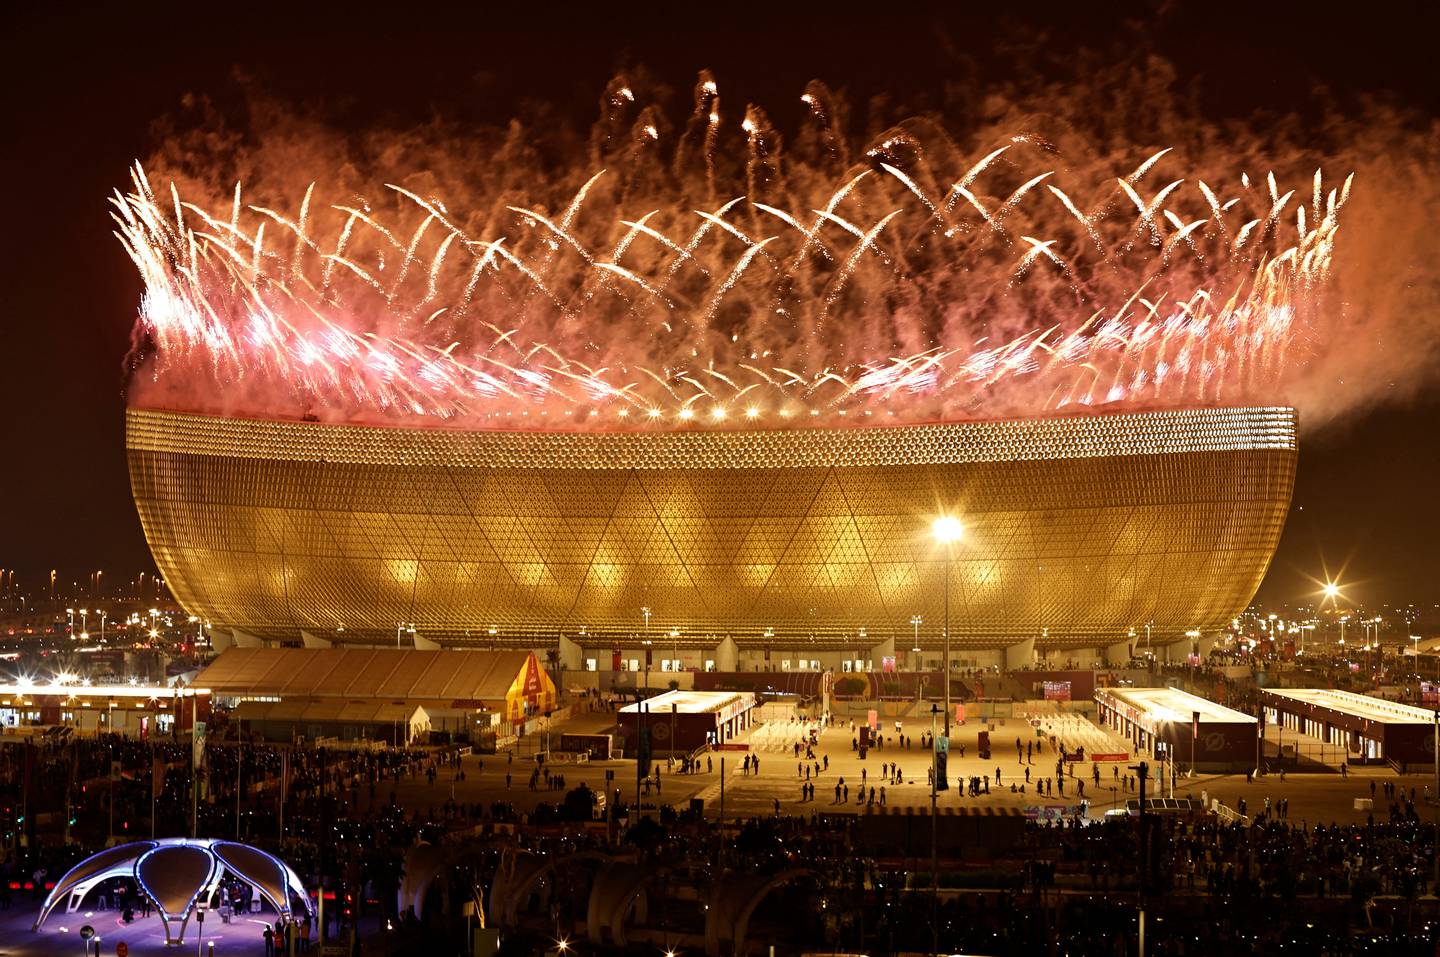 The Fifa World Cup Qatar 2022 attracted plenty of visitors to the Middle East. Reuters